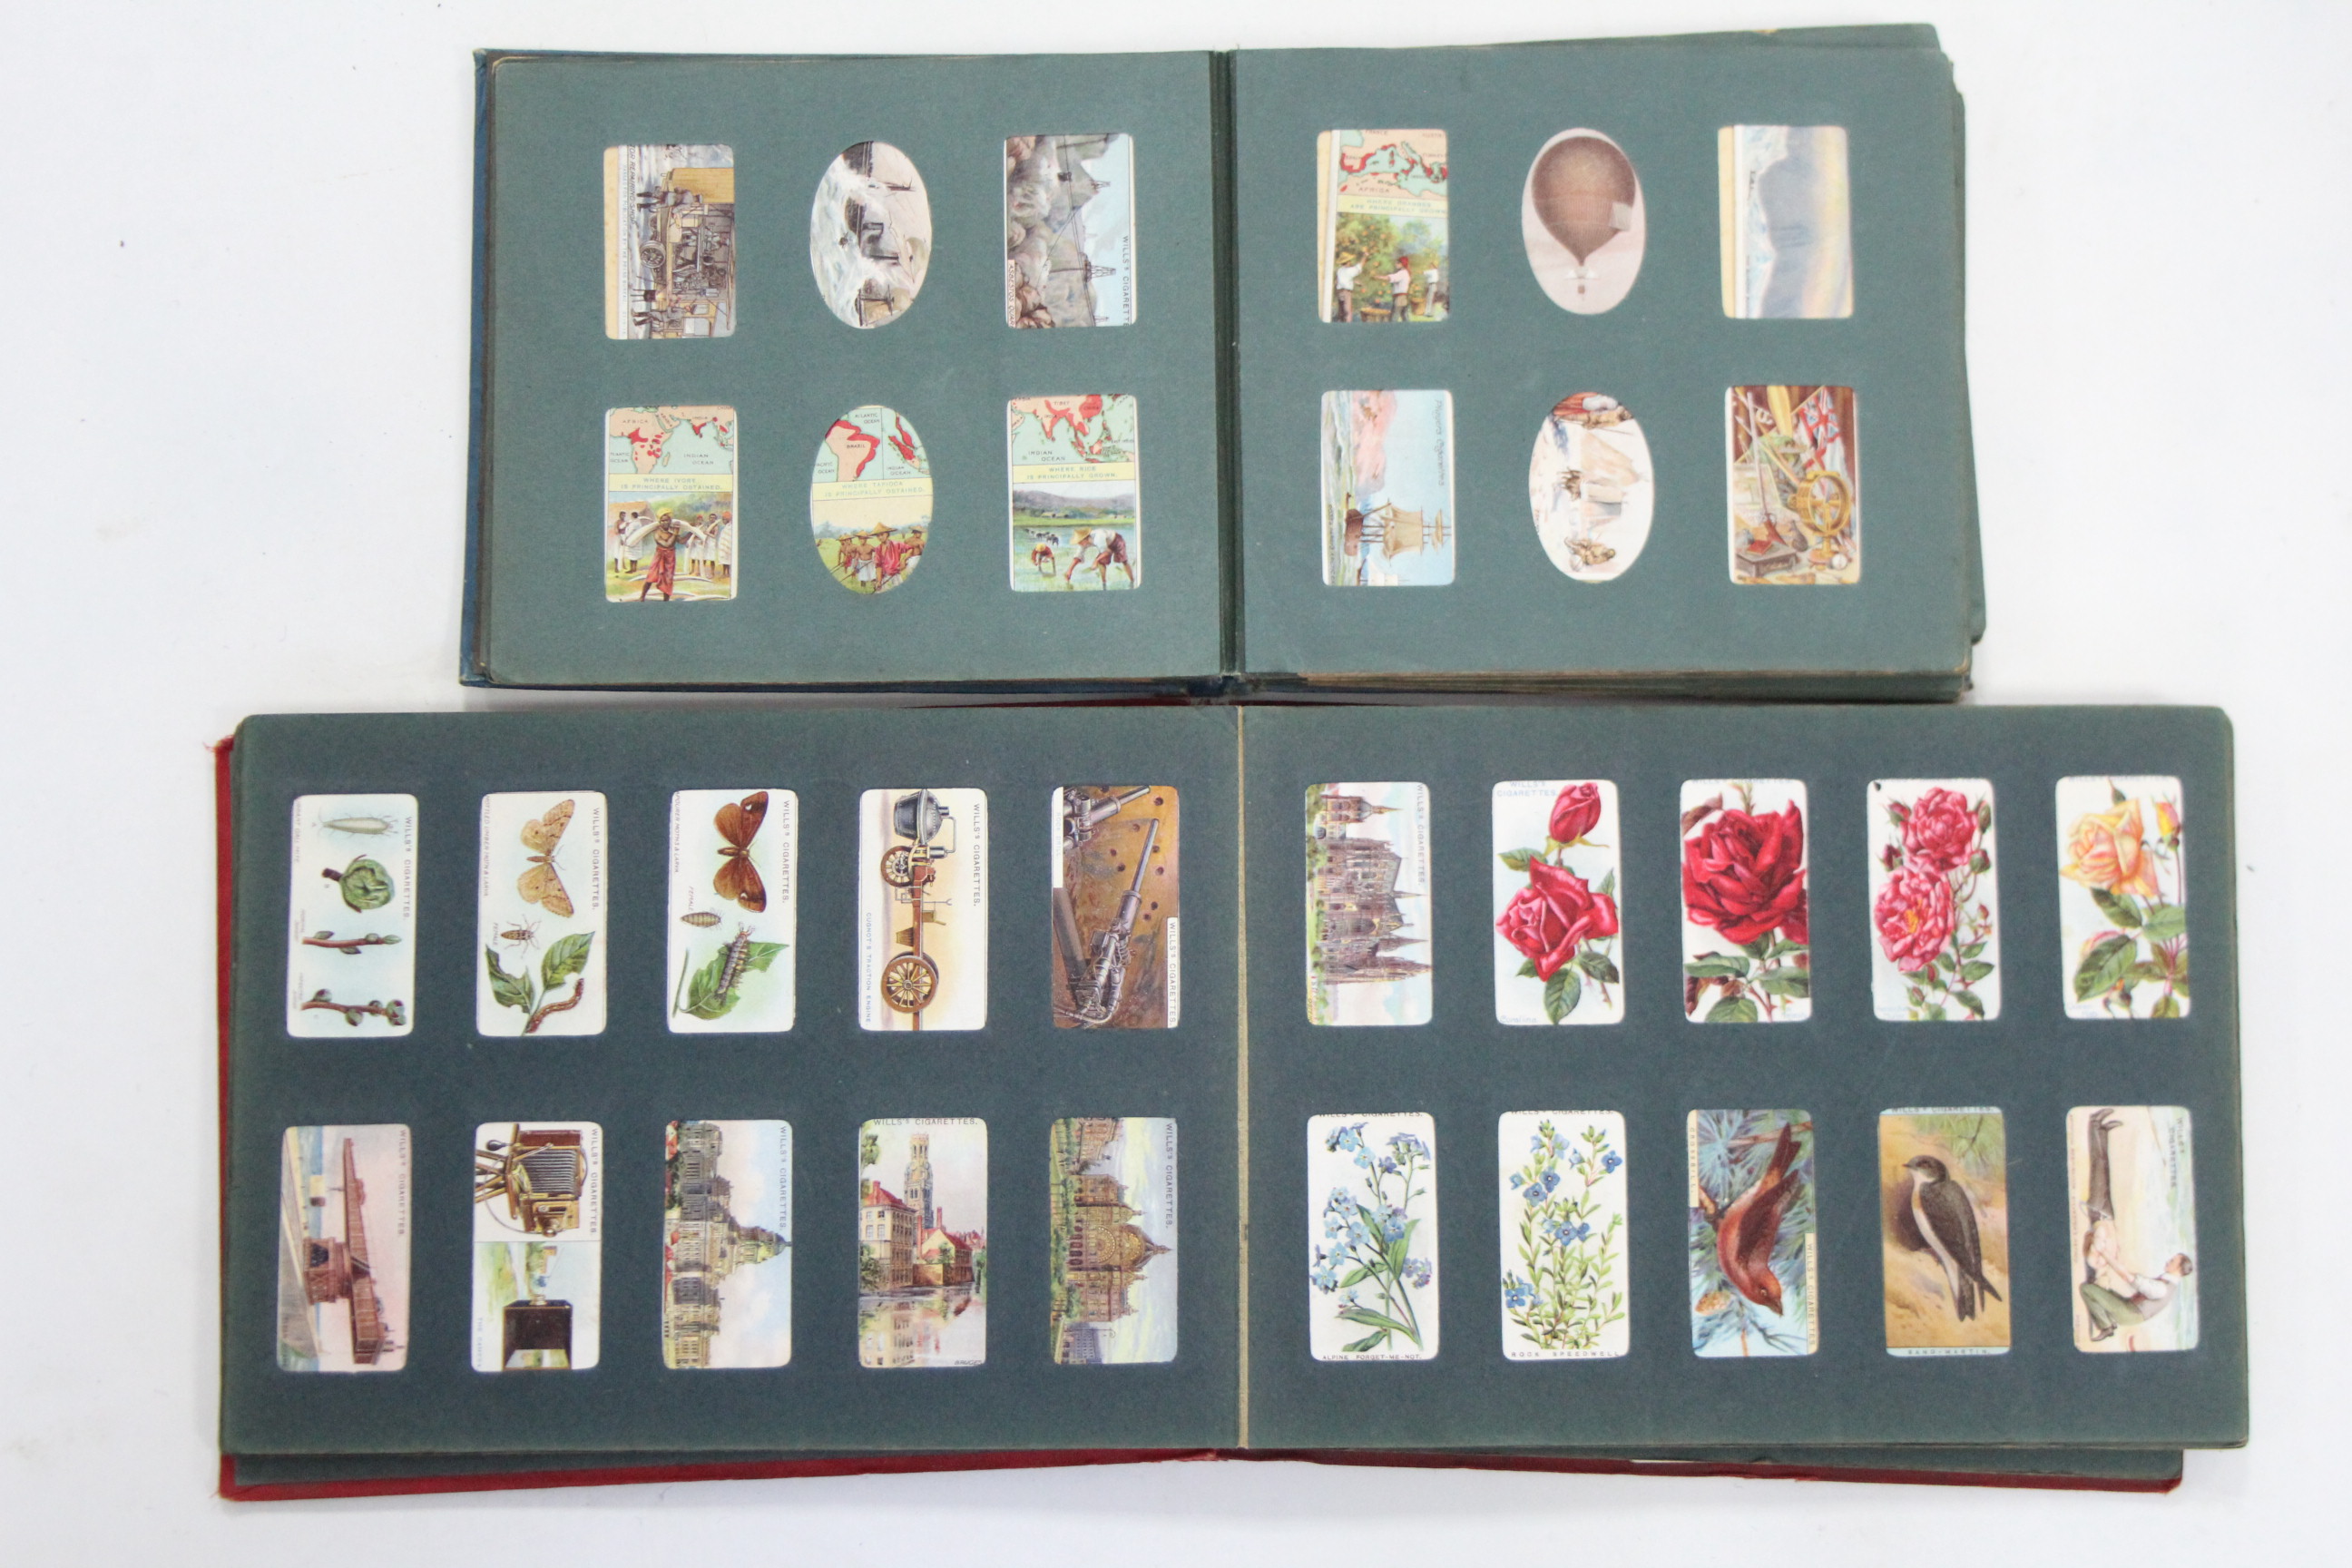 Approximately four hundred various cigarette cards by John Player & W. D. & H. O. Wills, circa early